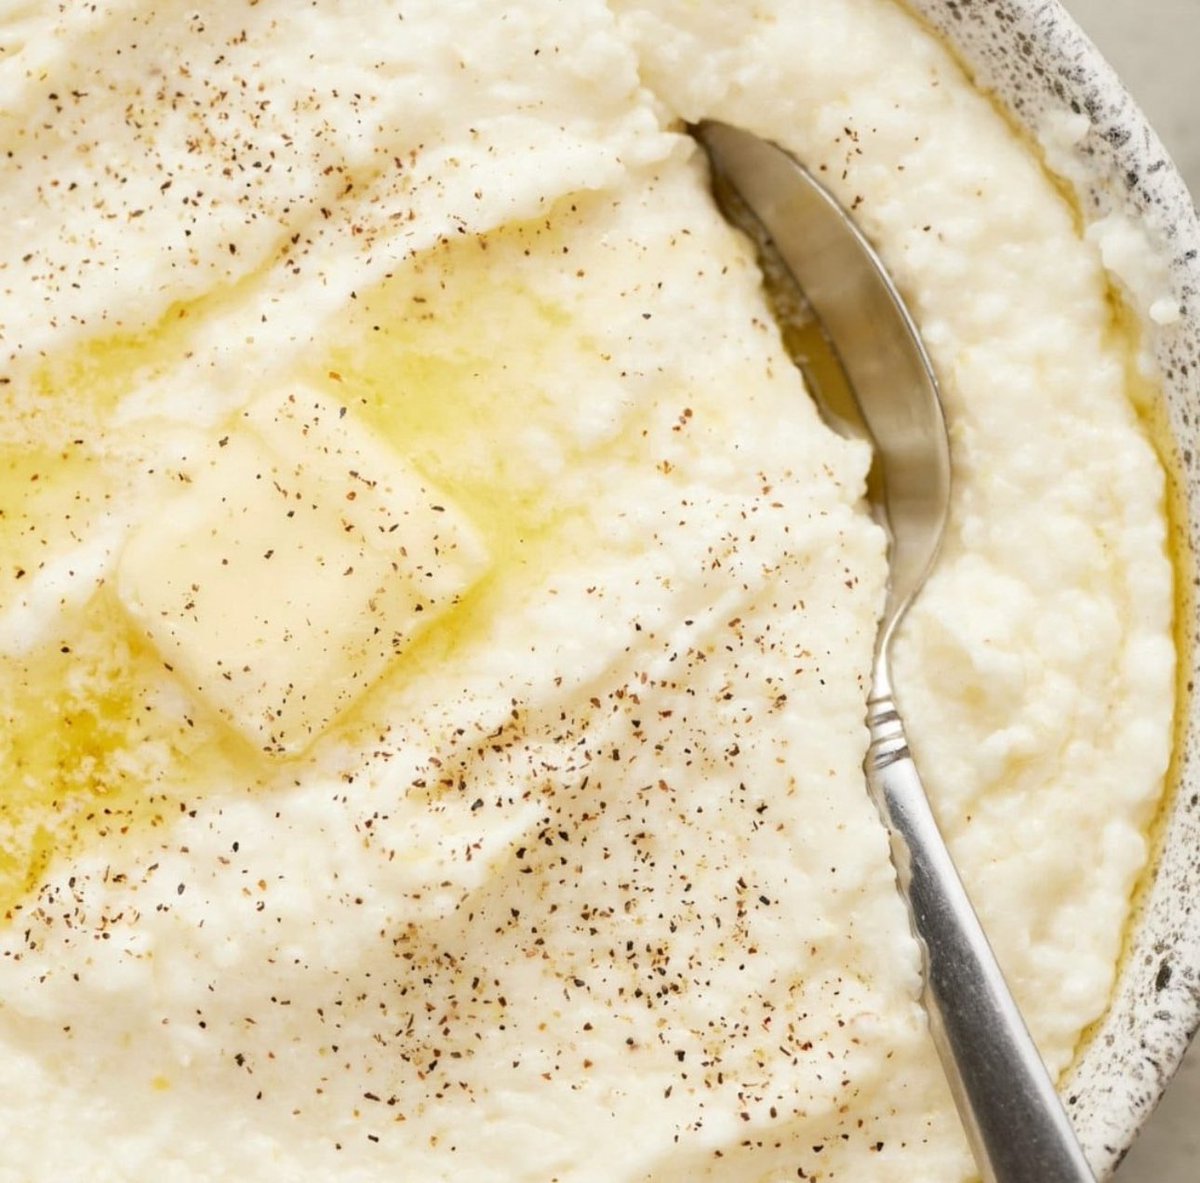 Good Morning to everyone who knows that salt and pepper belong in grits…not sugar.